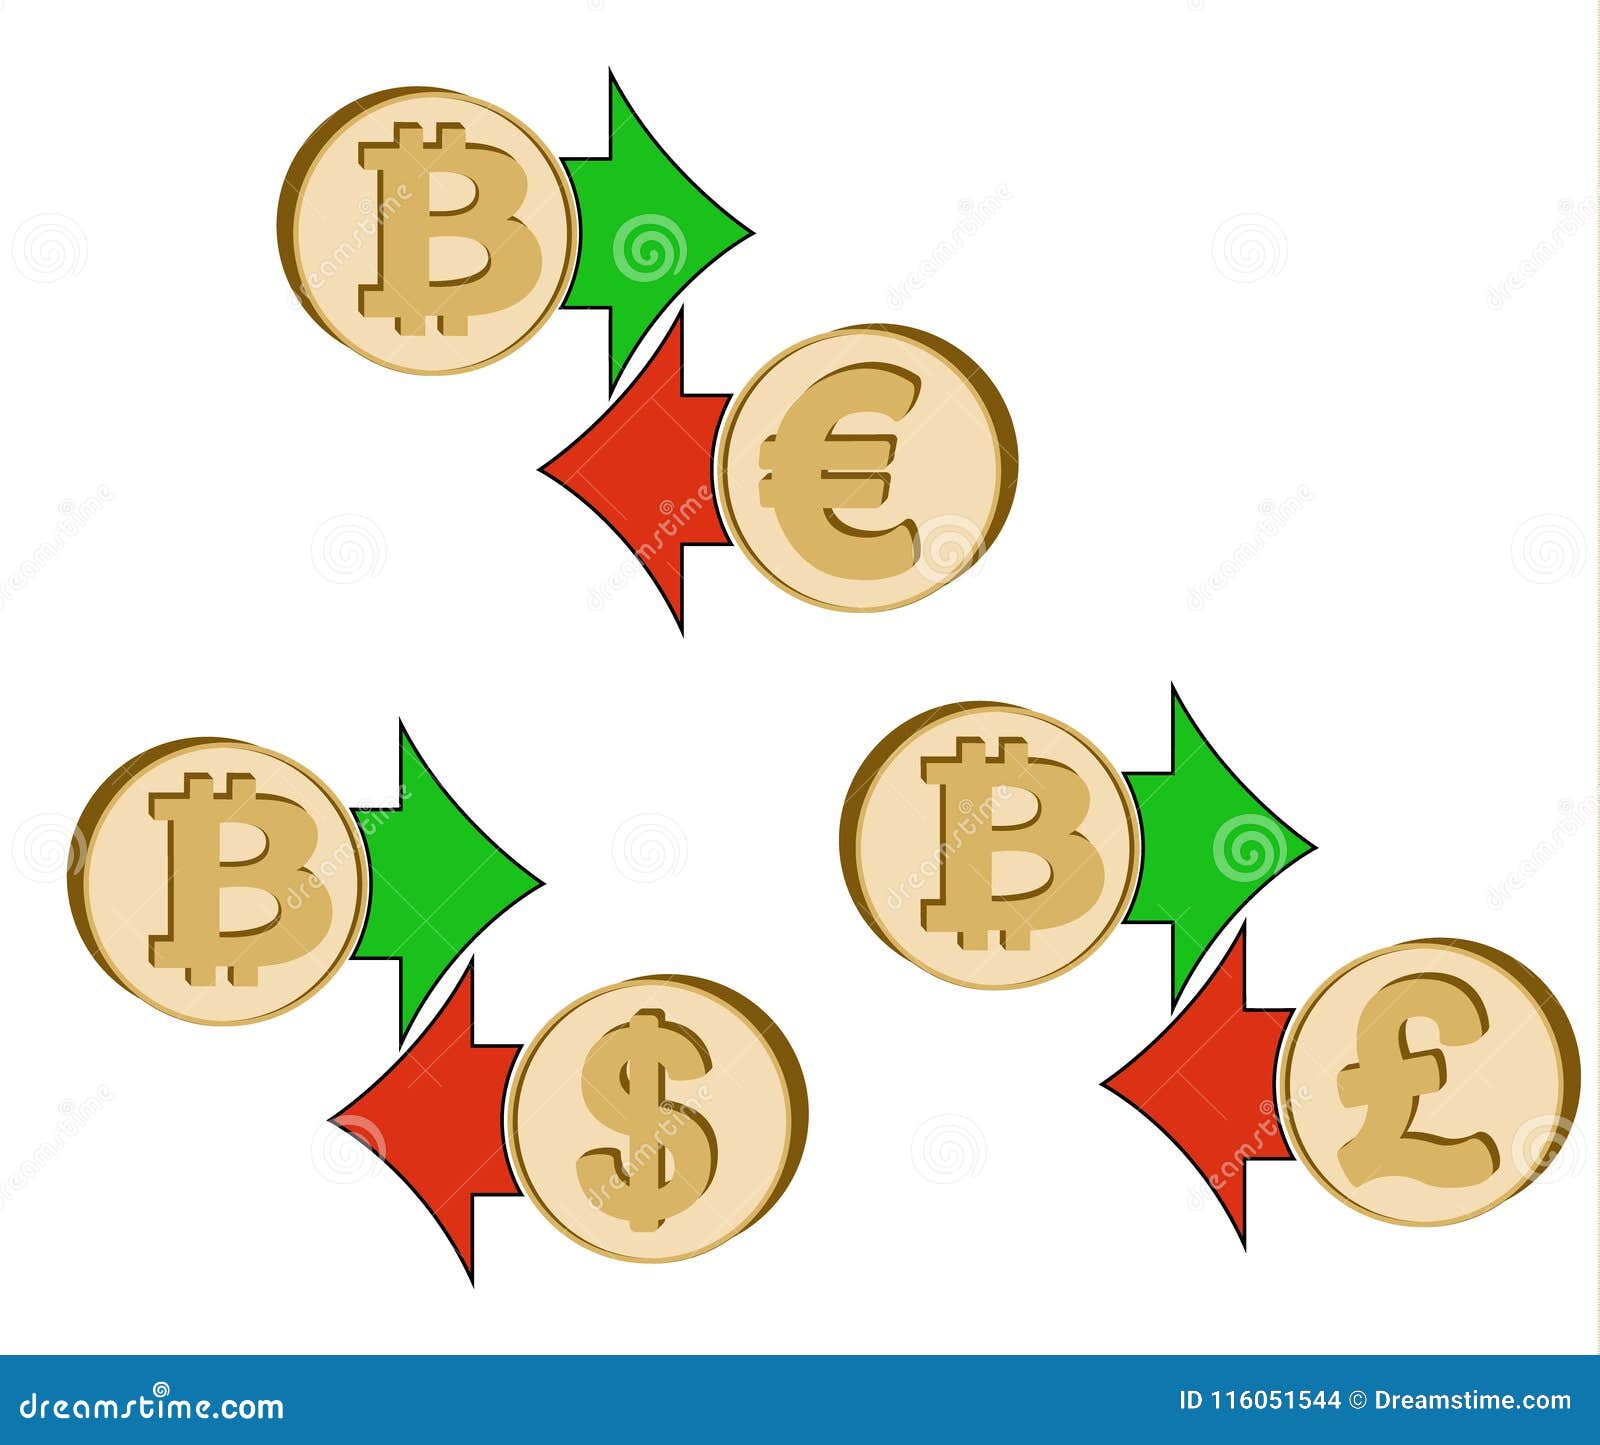 Exchange bitcoins to gbp buy crypto at true cost